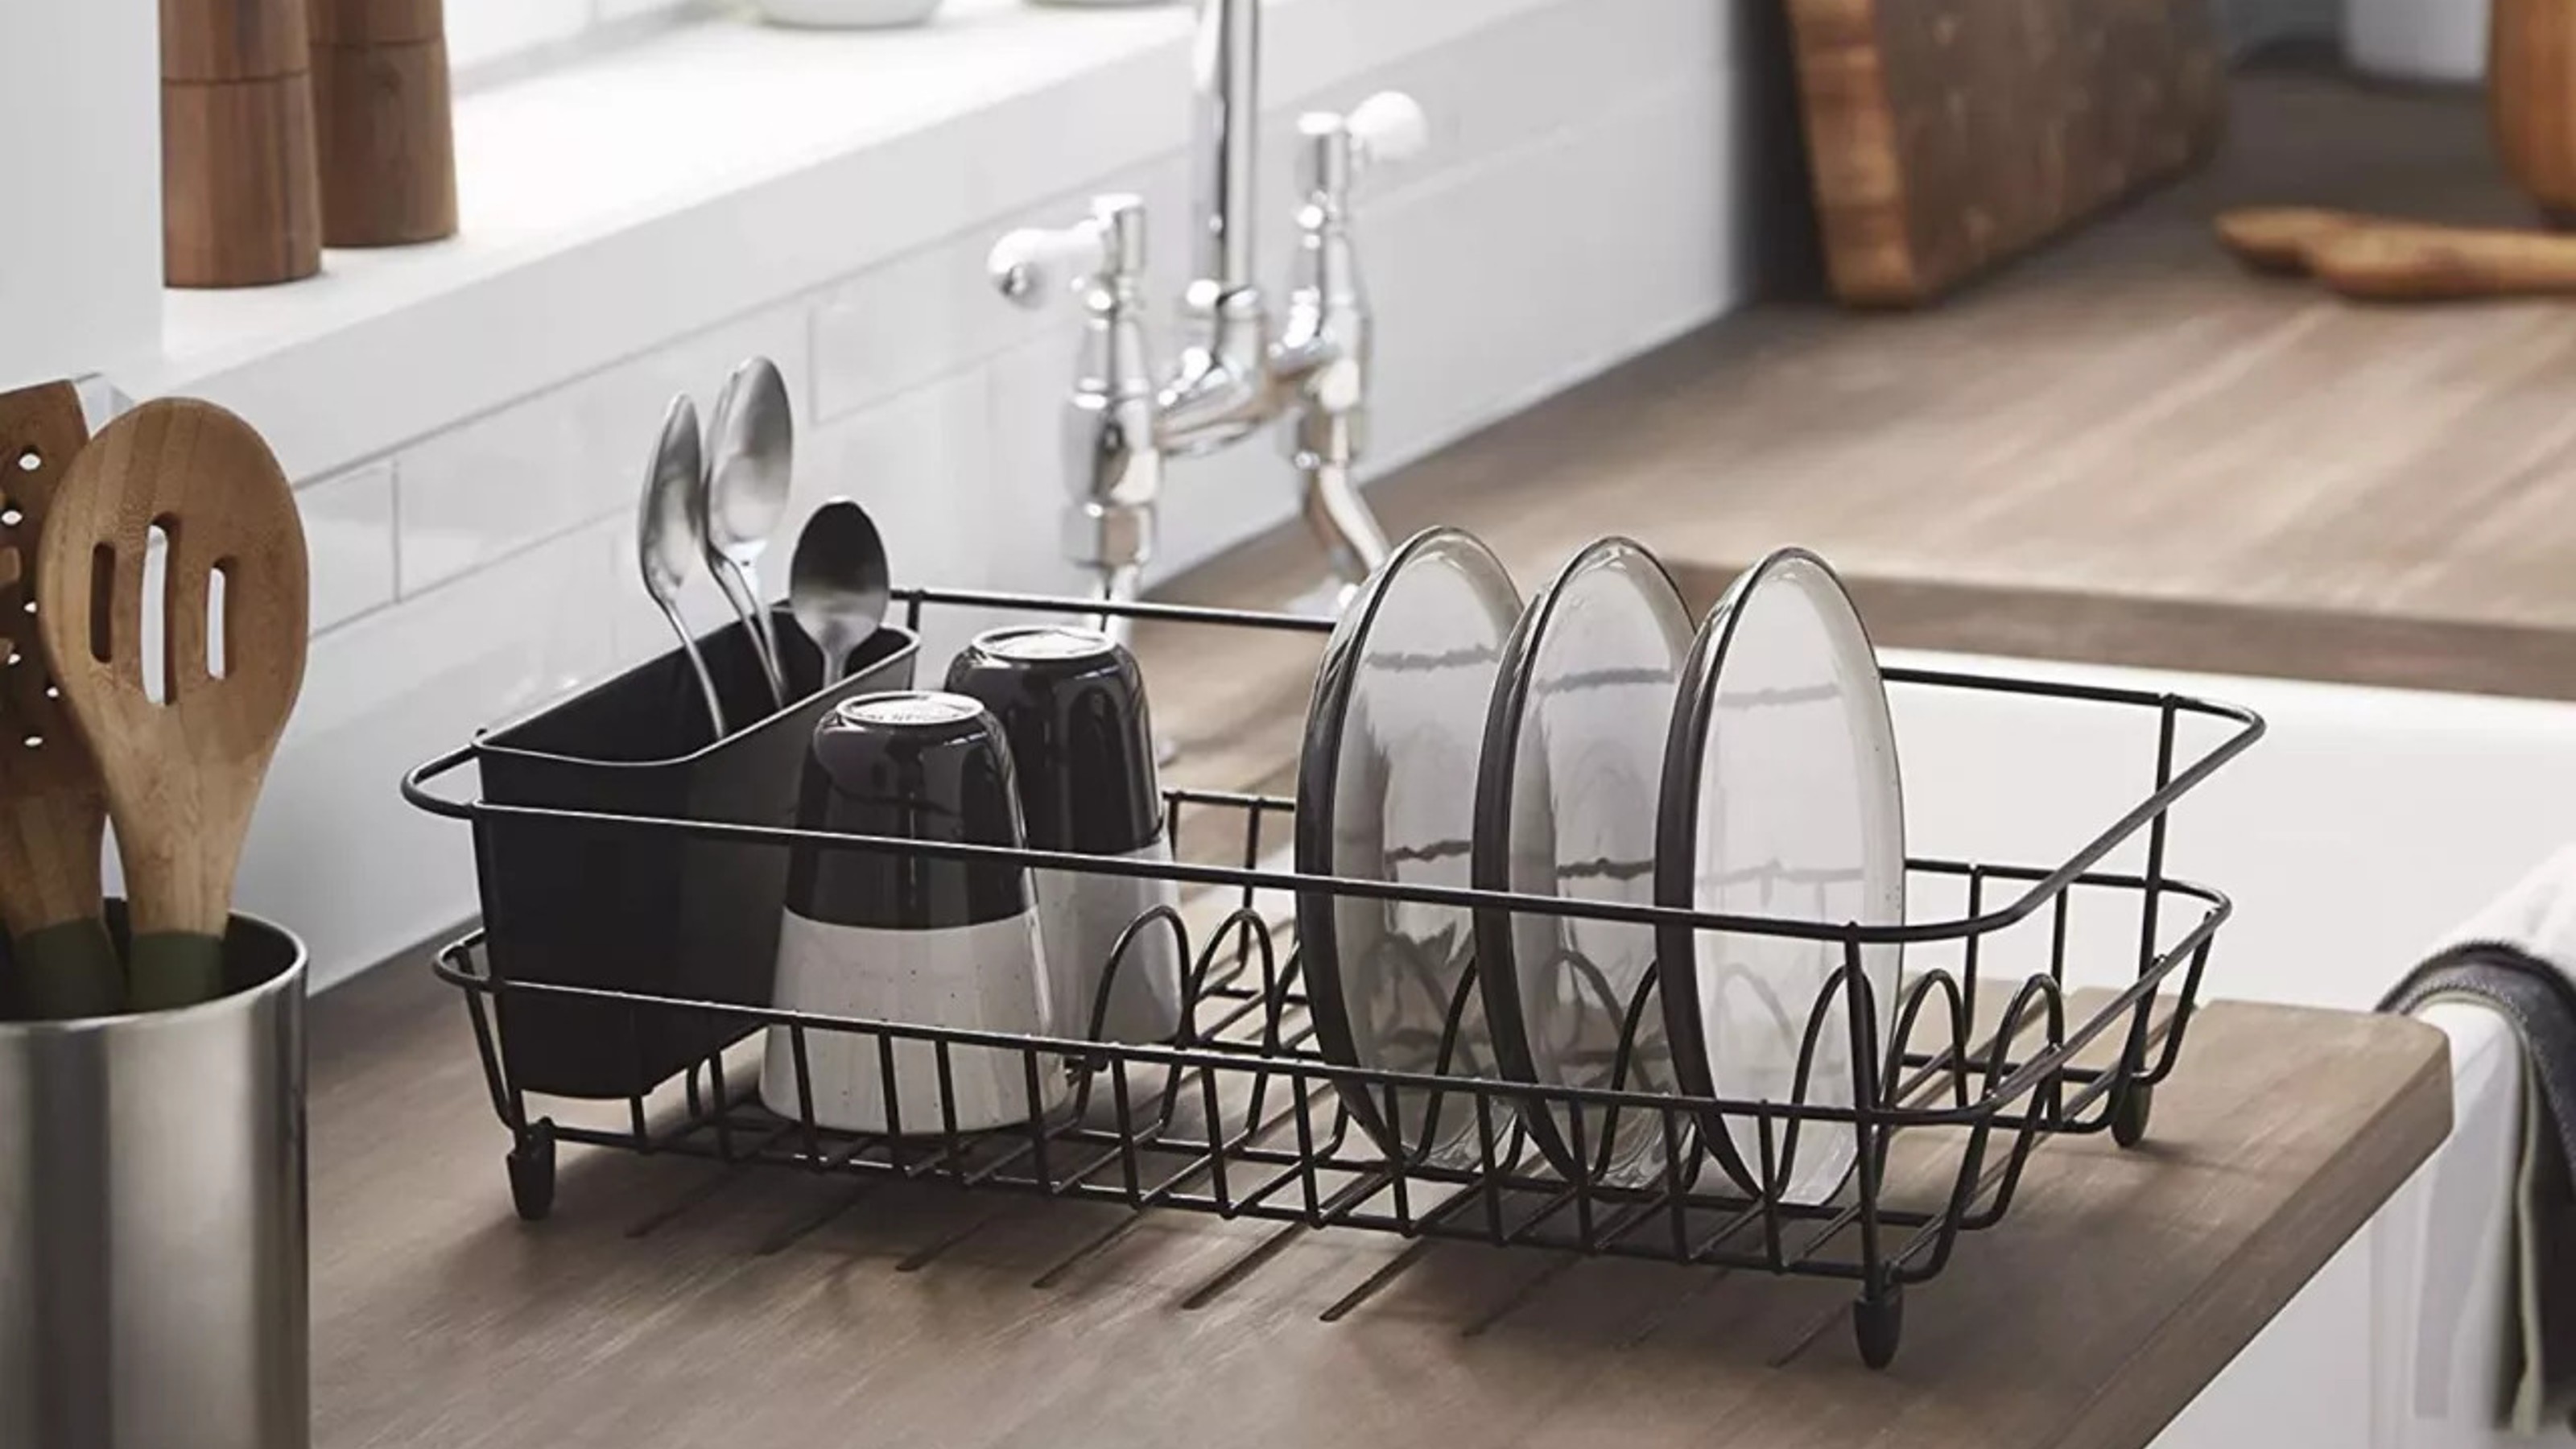 Kitchen Plastic Drain Bowl Rack With Cover Plastic Board Put